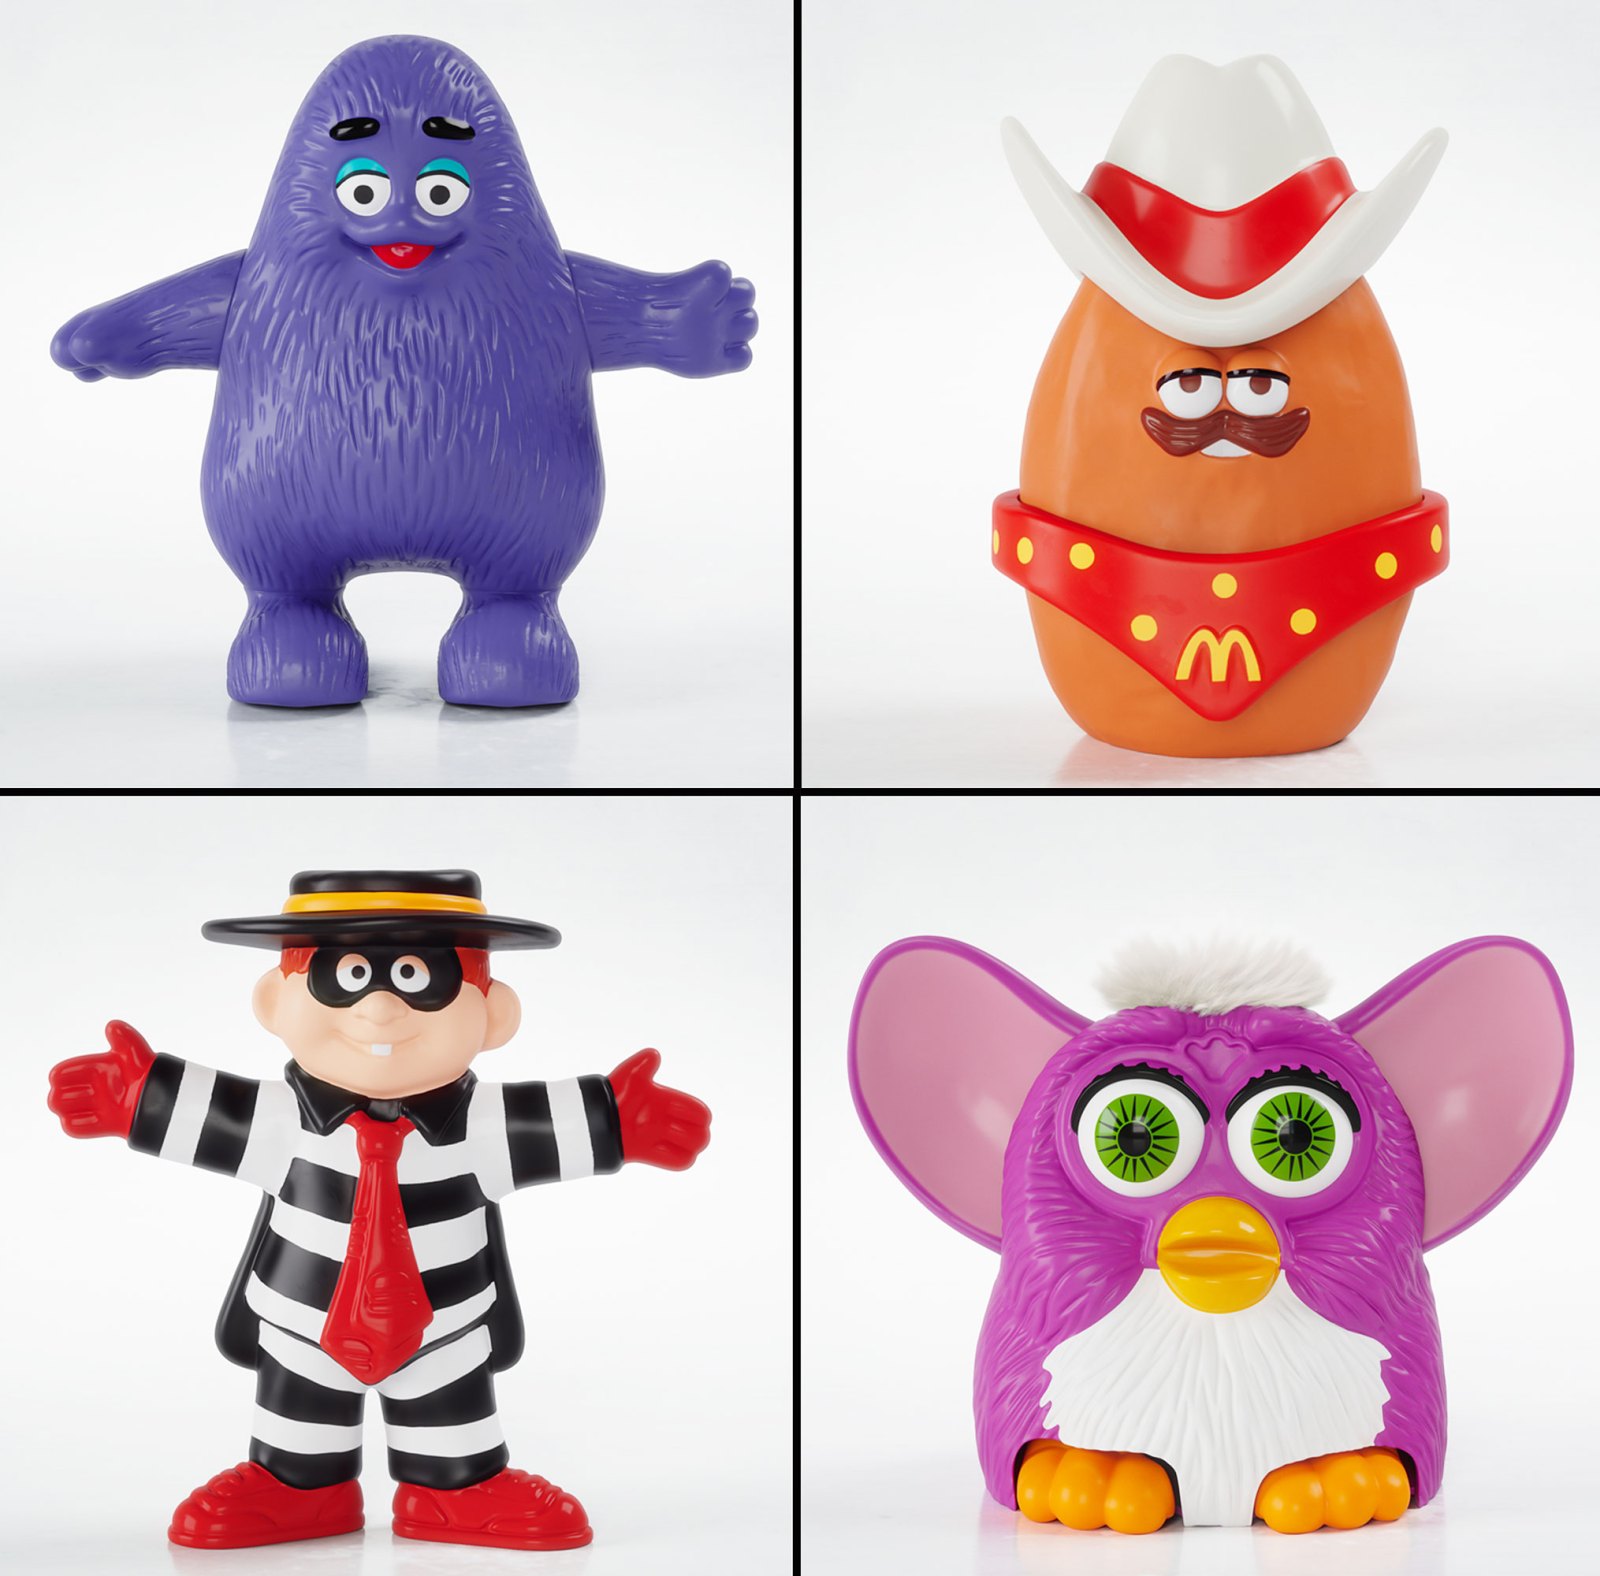 Throwback Happy Meal Toys Are Returning to Mcdonald’s See Furby, More